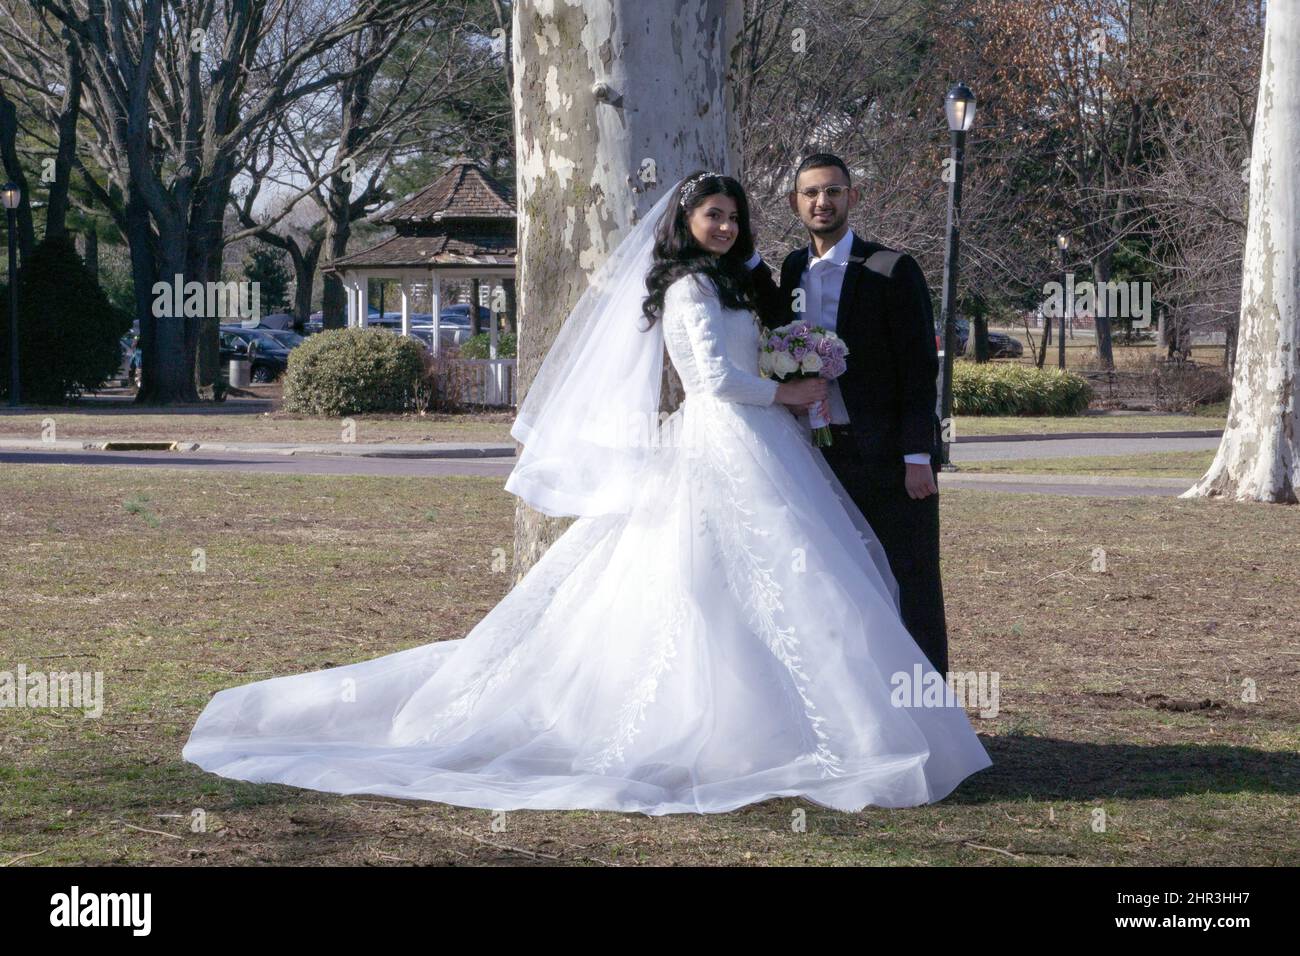 An orthodox Jewish couple pose for wedding photos in a park in Queens, New York on a mild winter day. Stock Photo